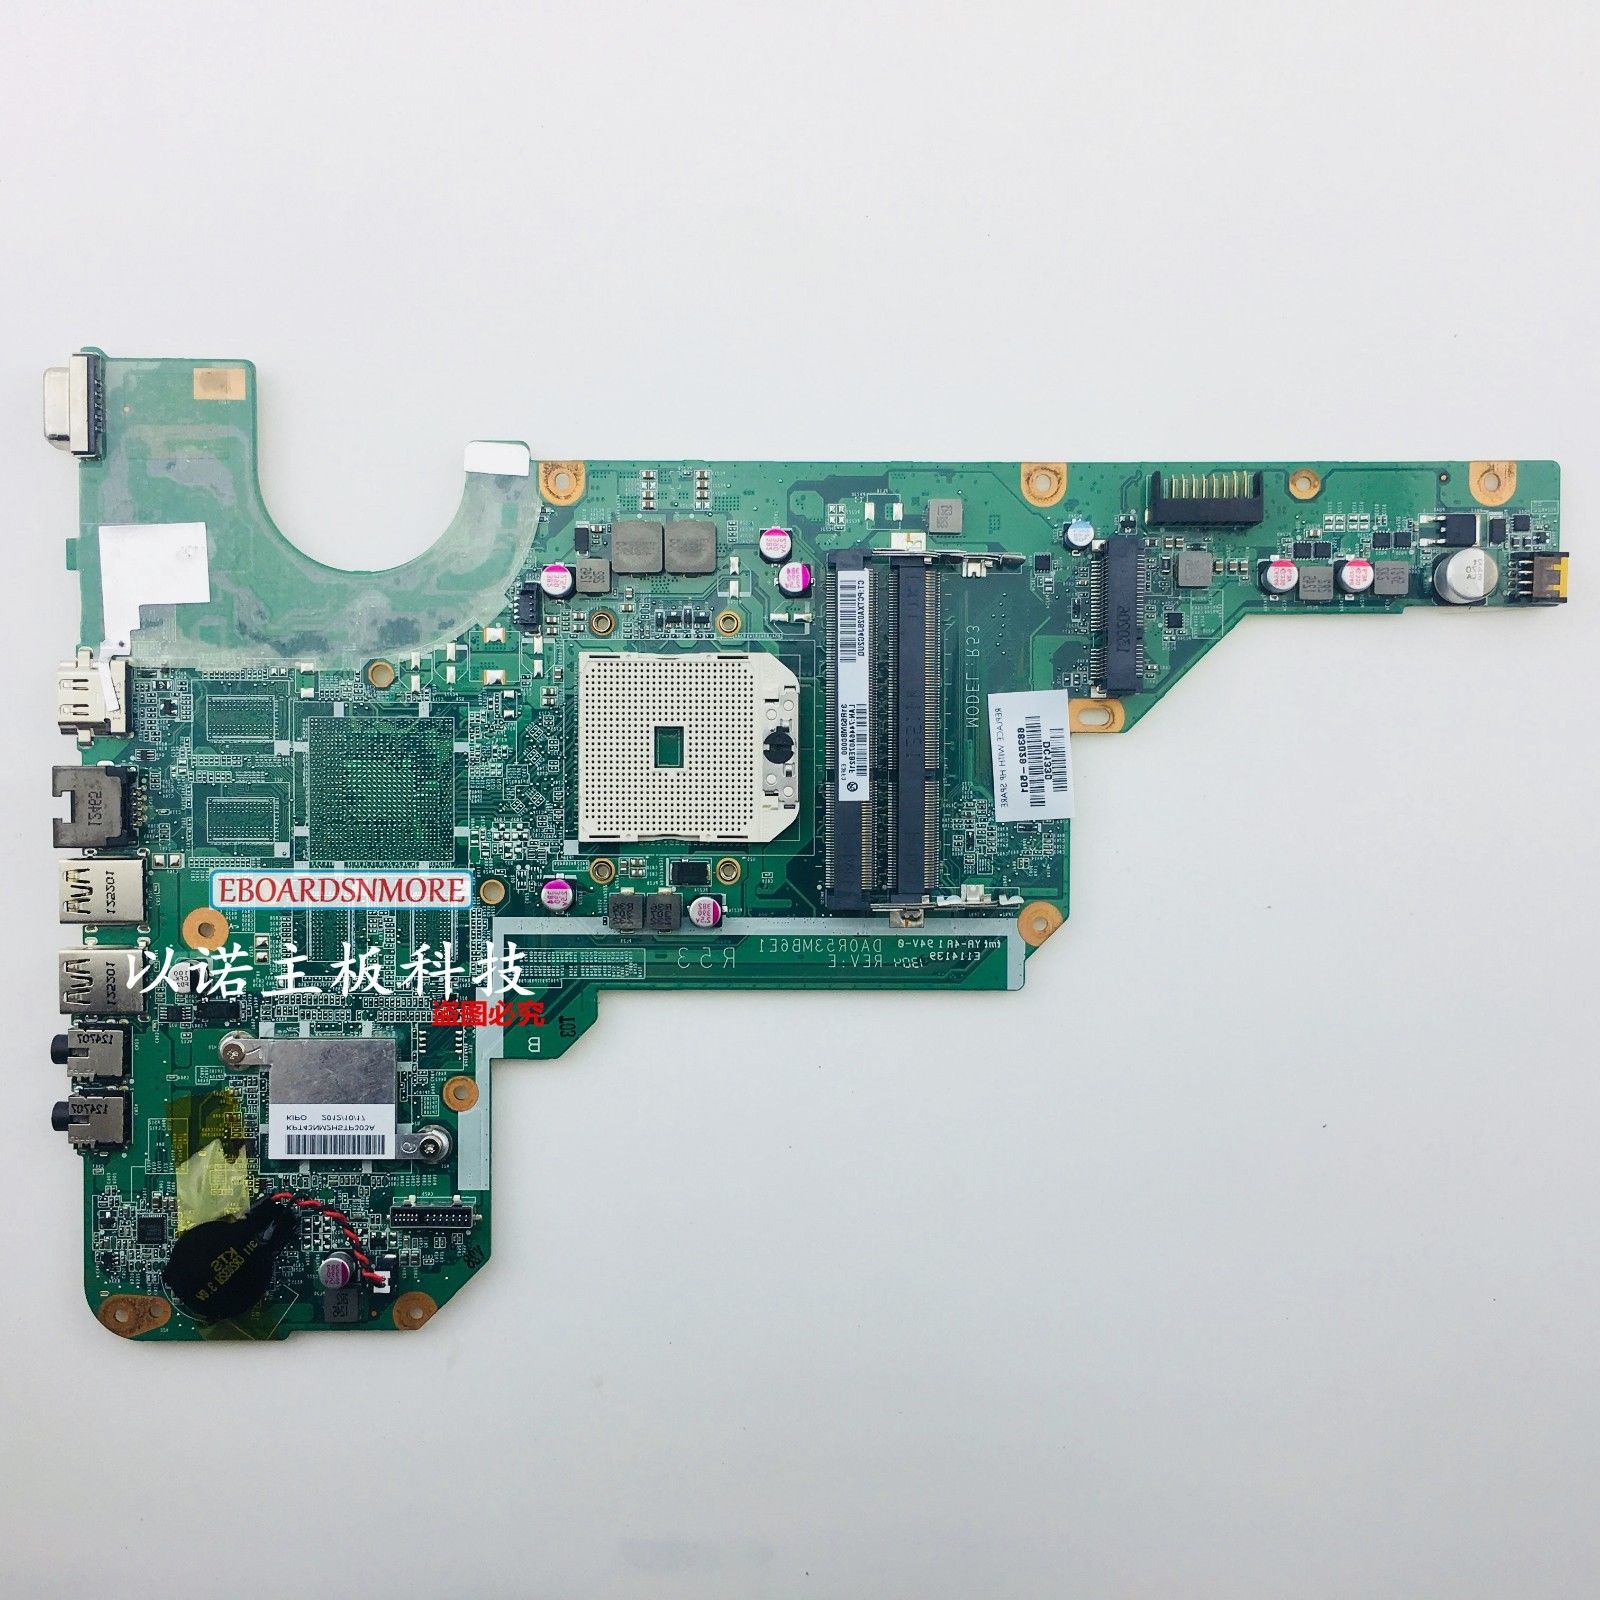 683029-501 683029-001 AMD Motherboard For HP Pavilion G6-2200 -2300 Laptops, A 683029-501 683029-001 AMD INT